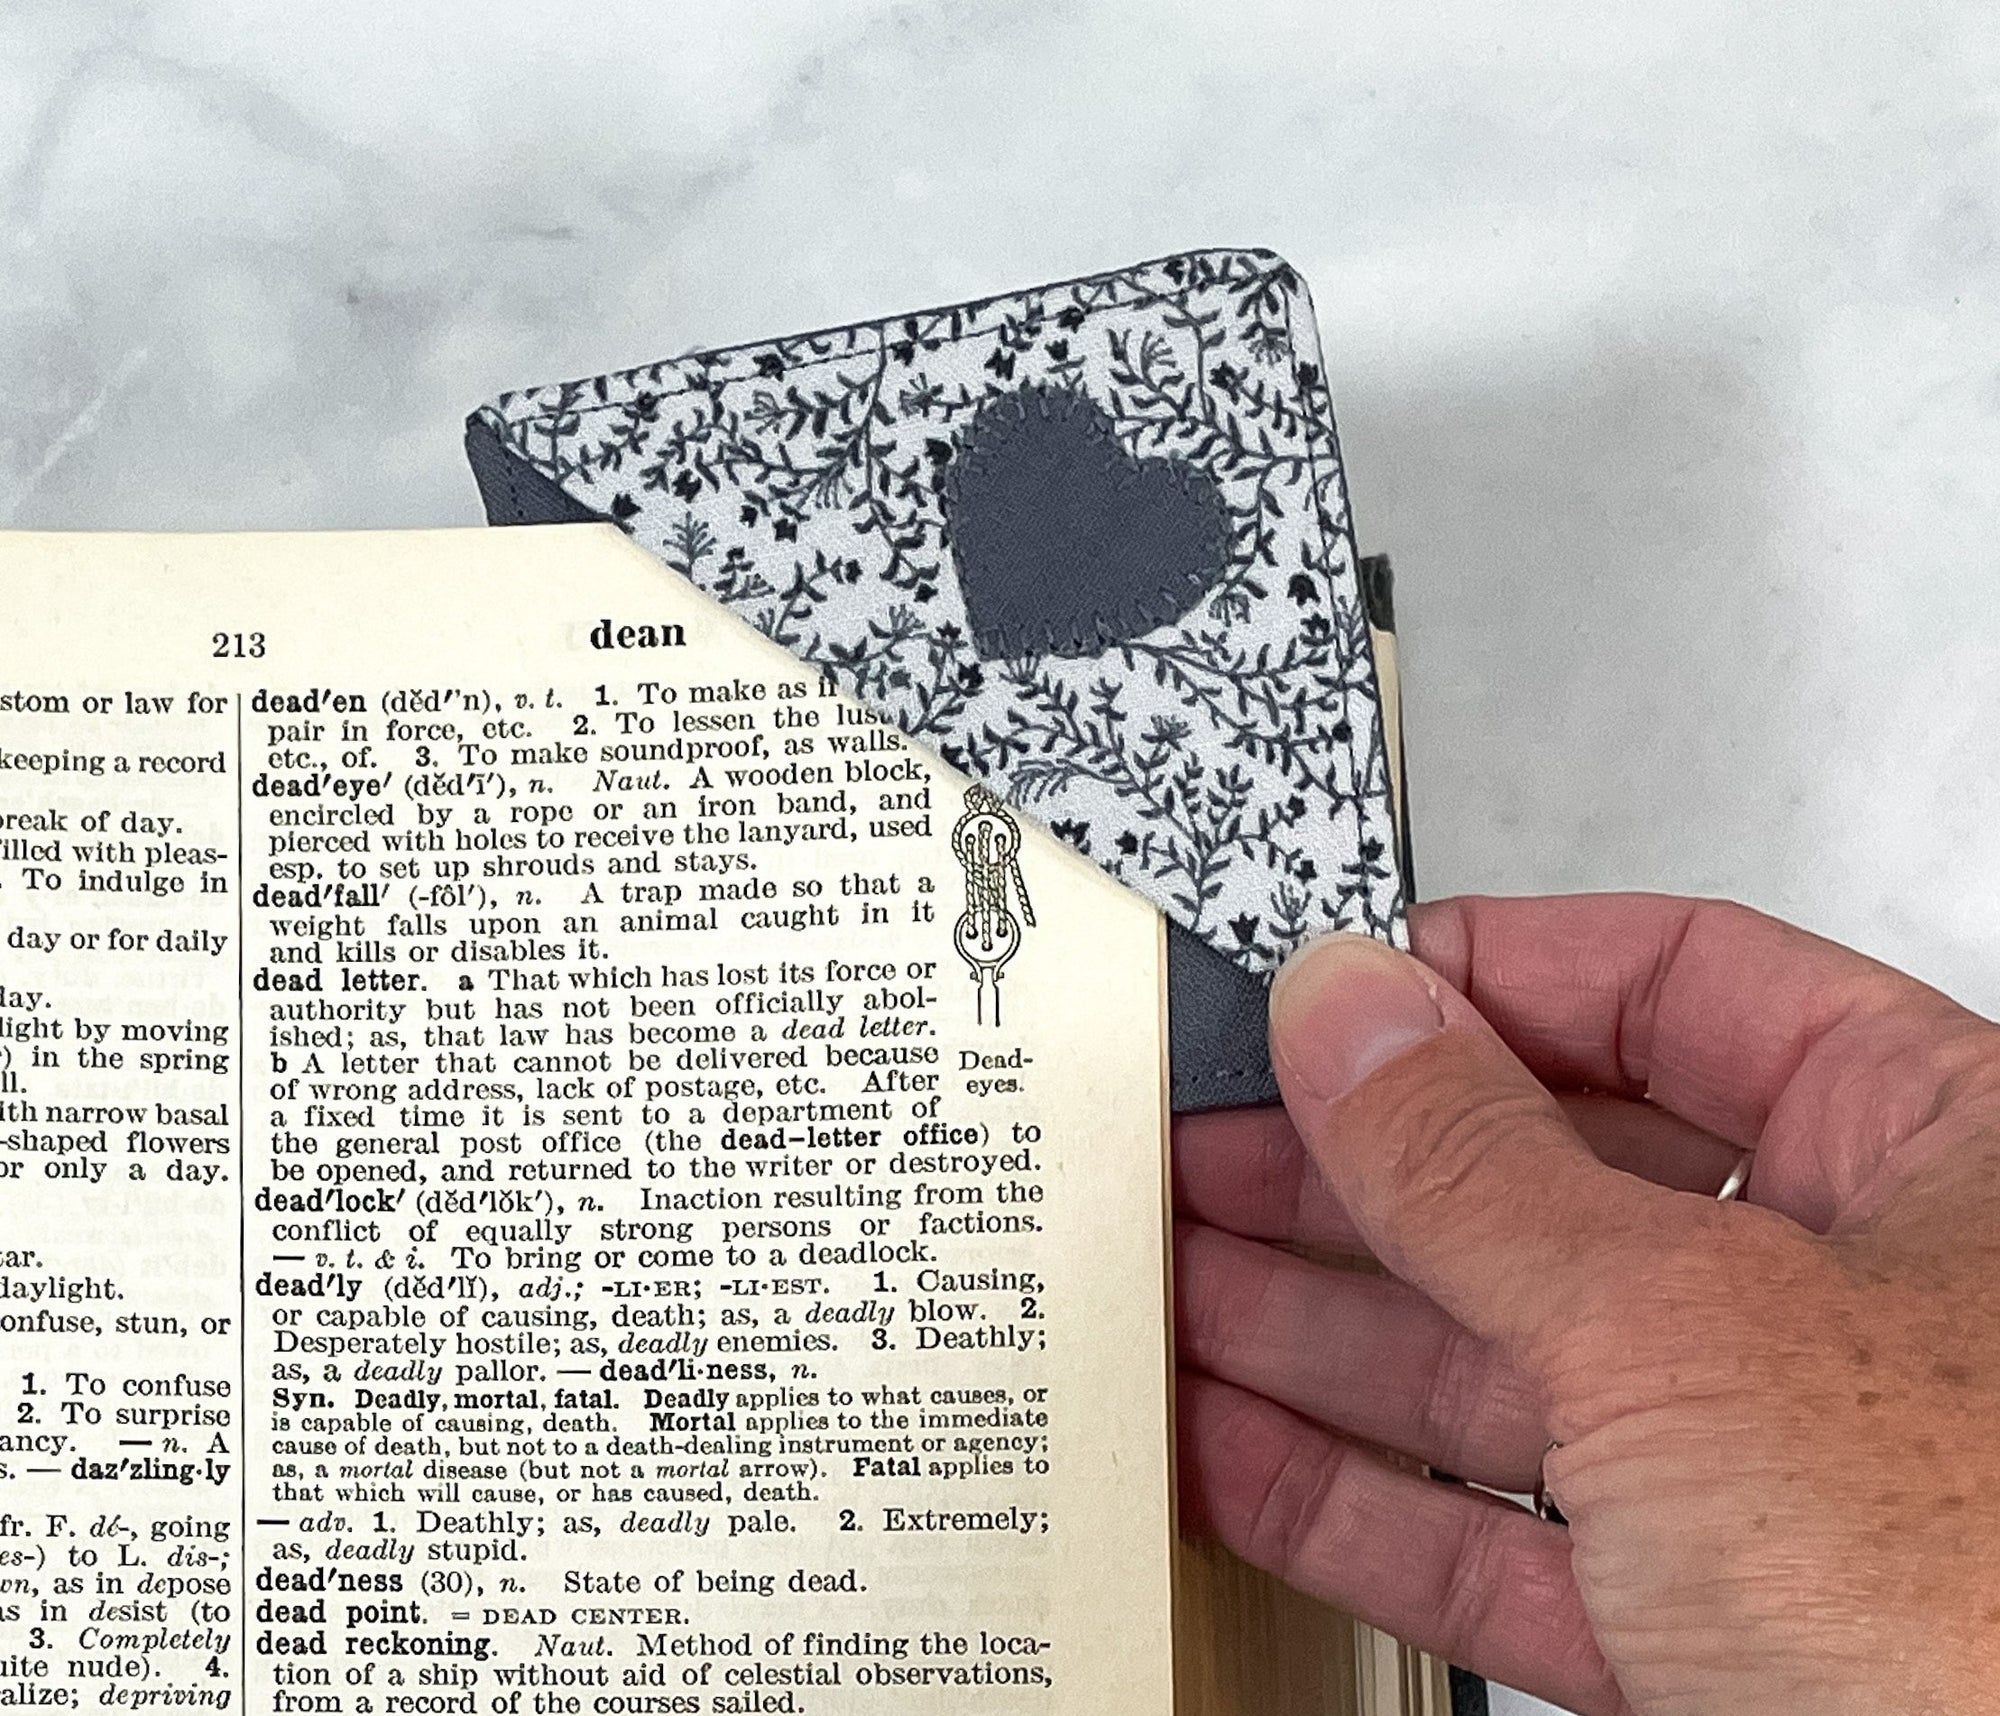 A handmade corner bookmark made from a fun flower and heart themed cotton fabric in shades of gray.  The page marker is square and is being shown sliding over the corner of a page in a book.